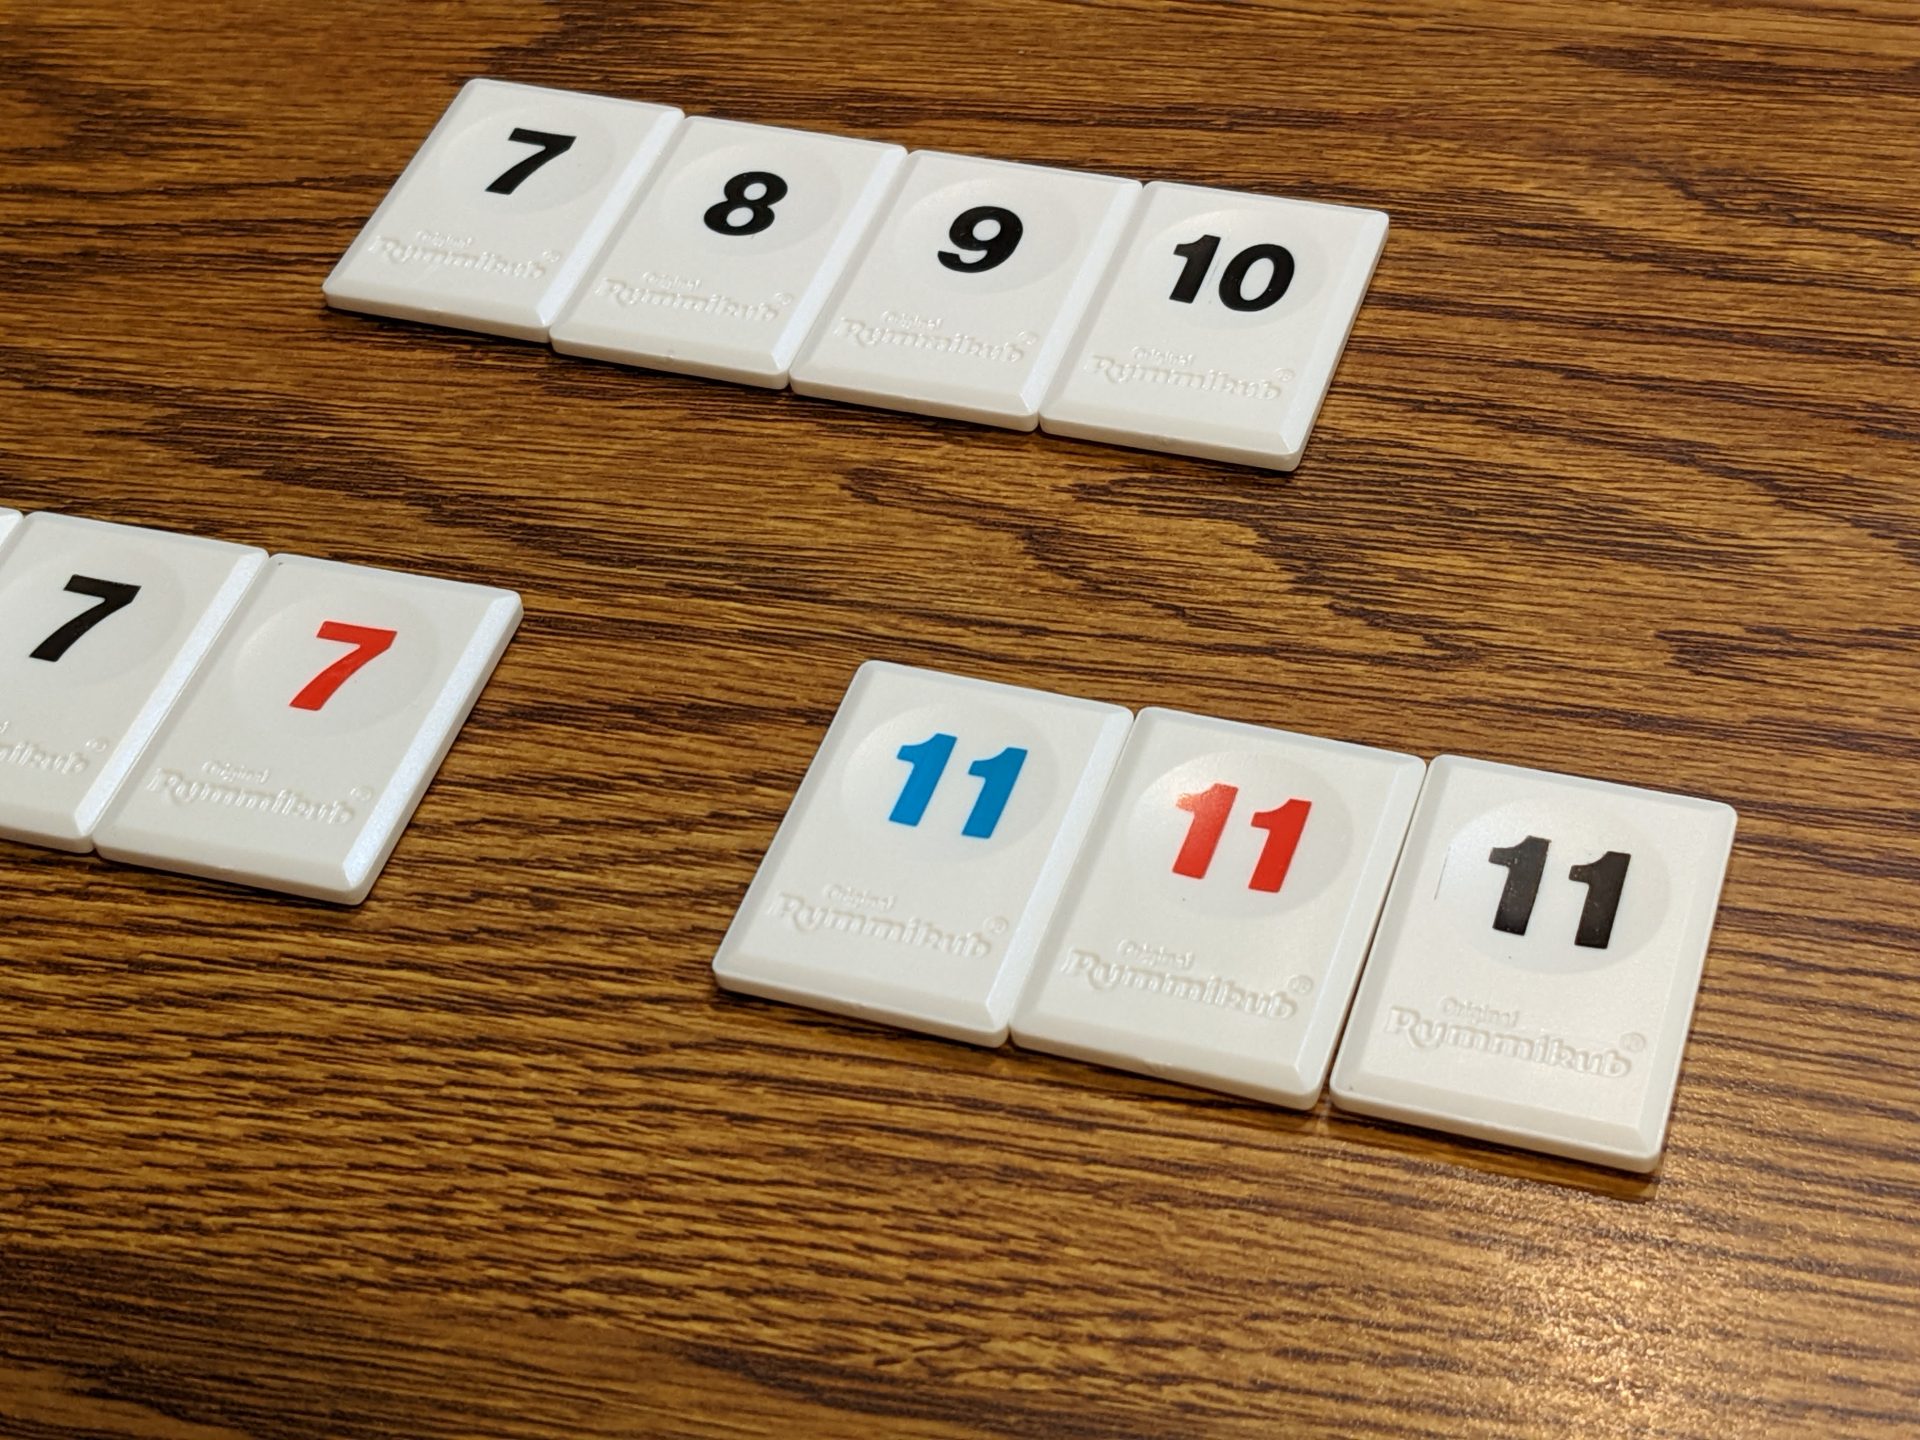 THE ORIGINAL RUMMIKUB TILE NUMBER GAME COMPLETE WITH INSTRUCTIONS